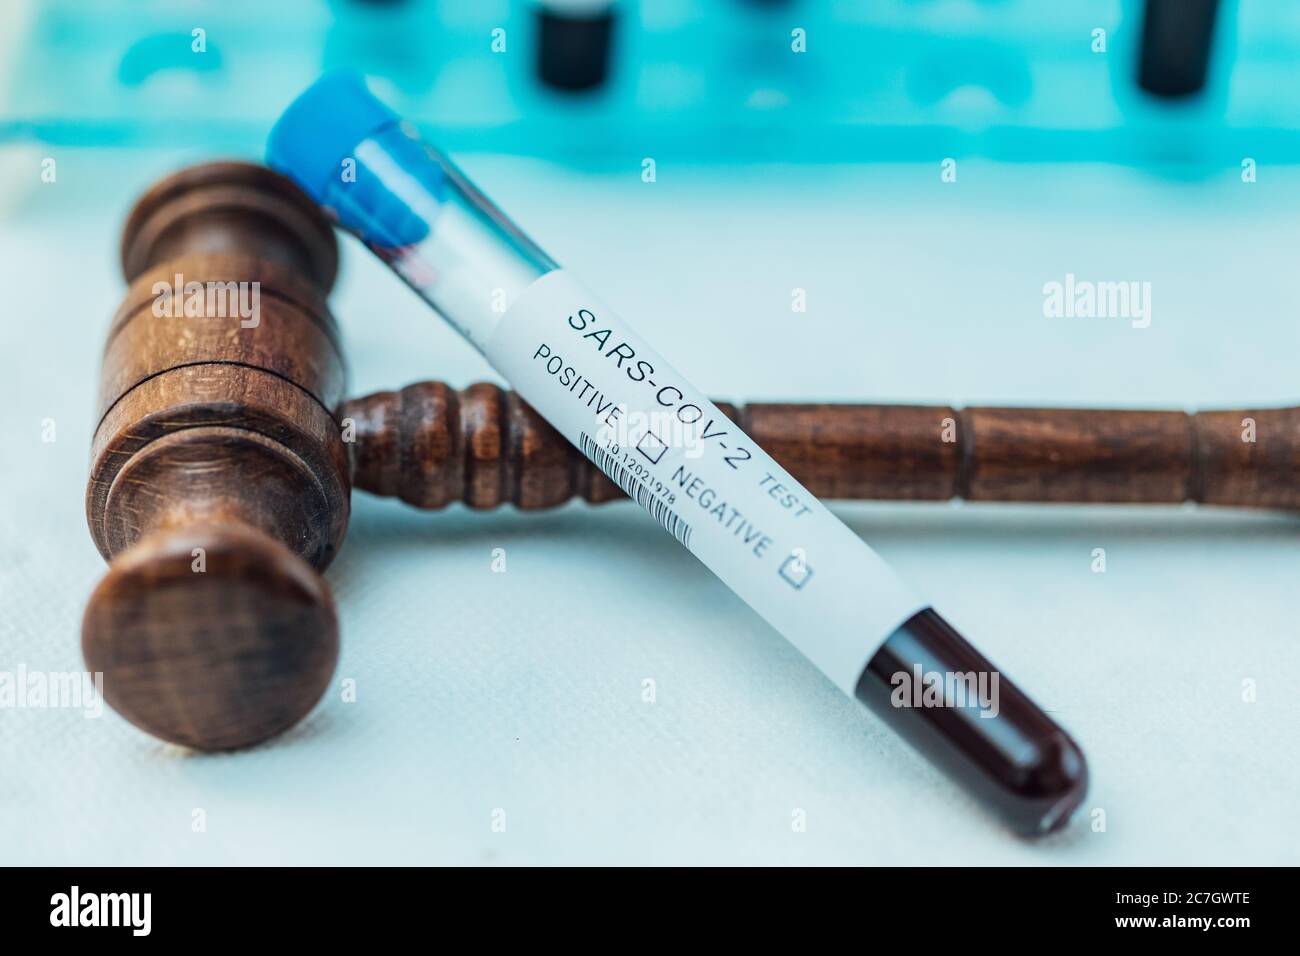 Test tube with blood to do COIVD test supported by judge's gavel Stock Photo